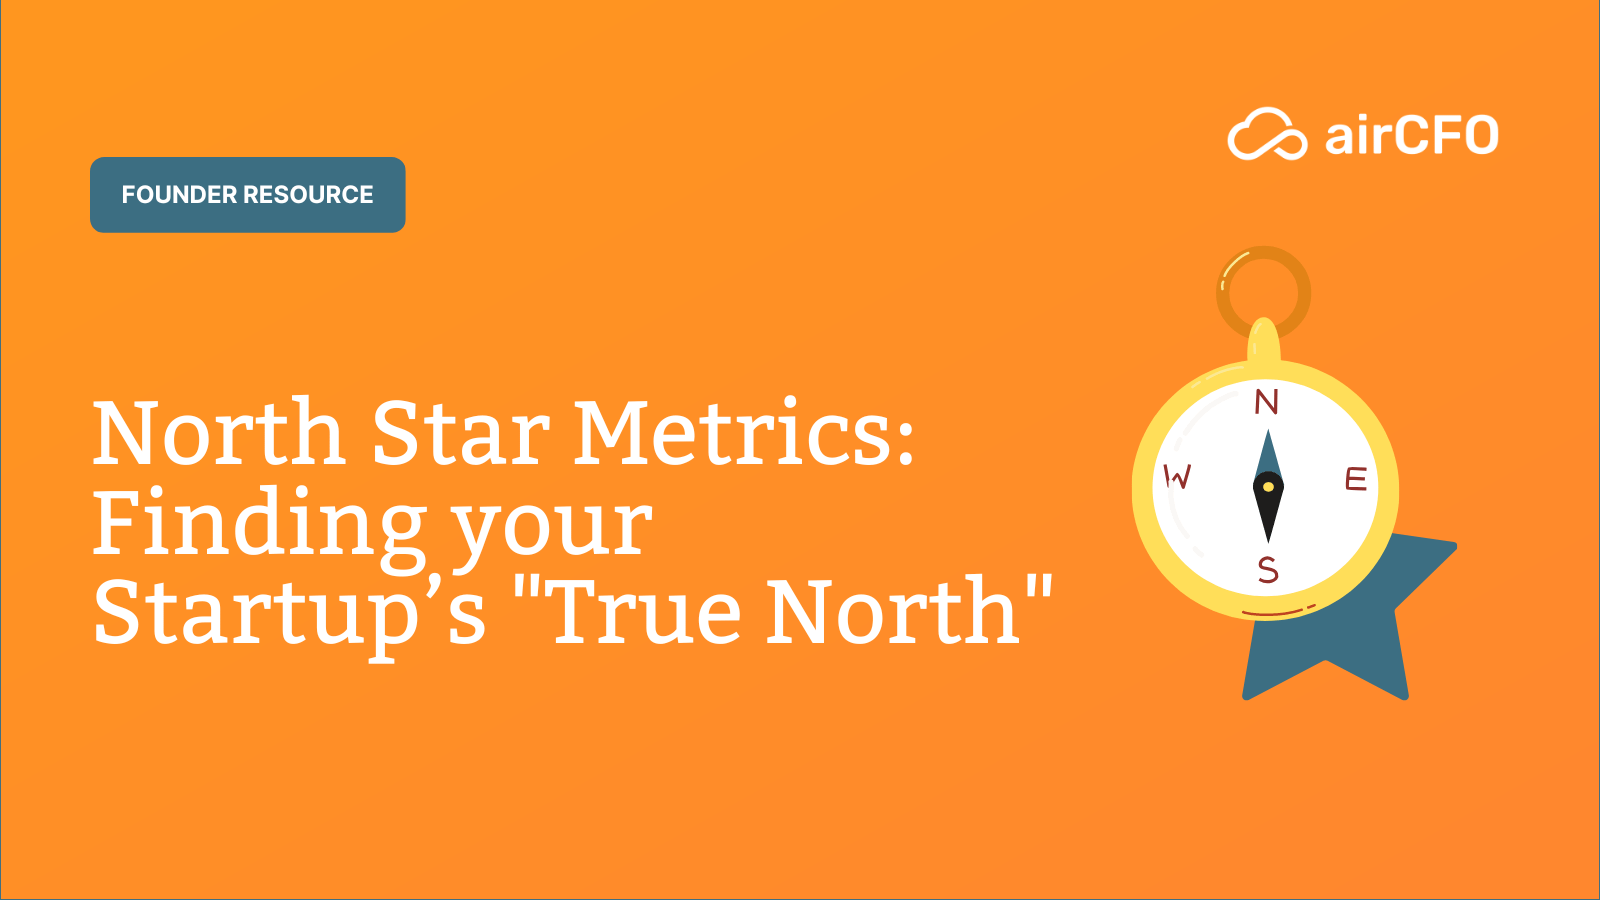 North Star Metrics: Finding your Startup’s “True North”